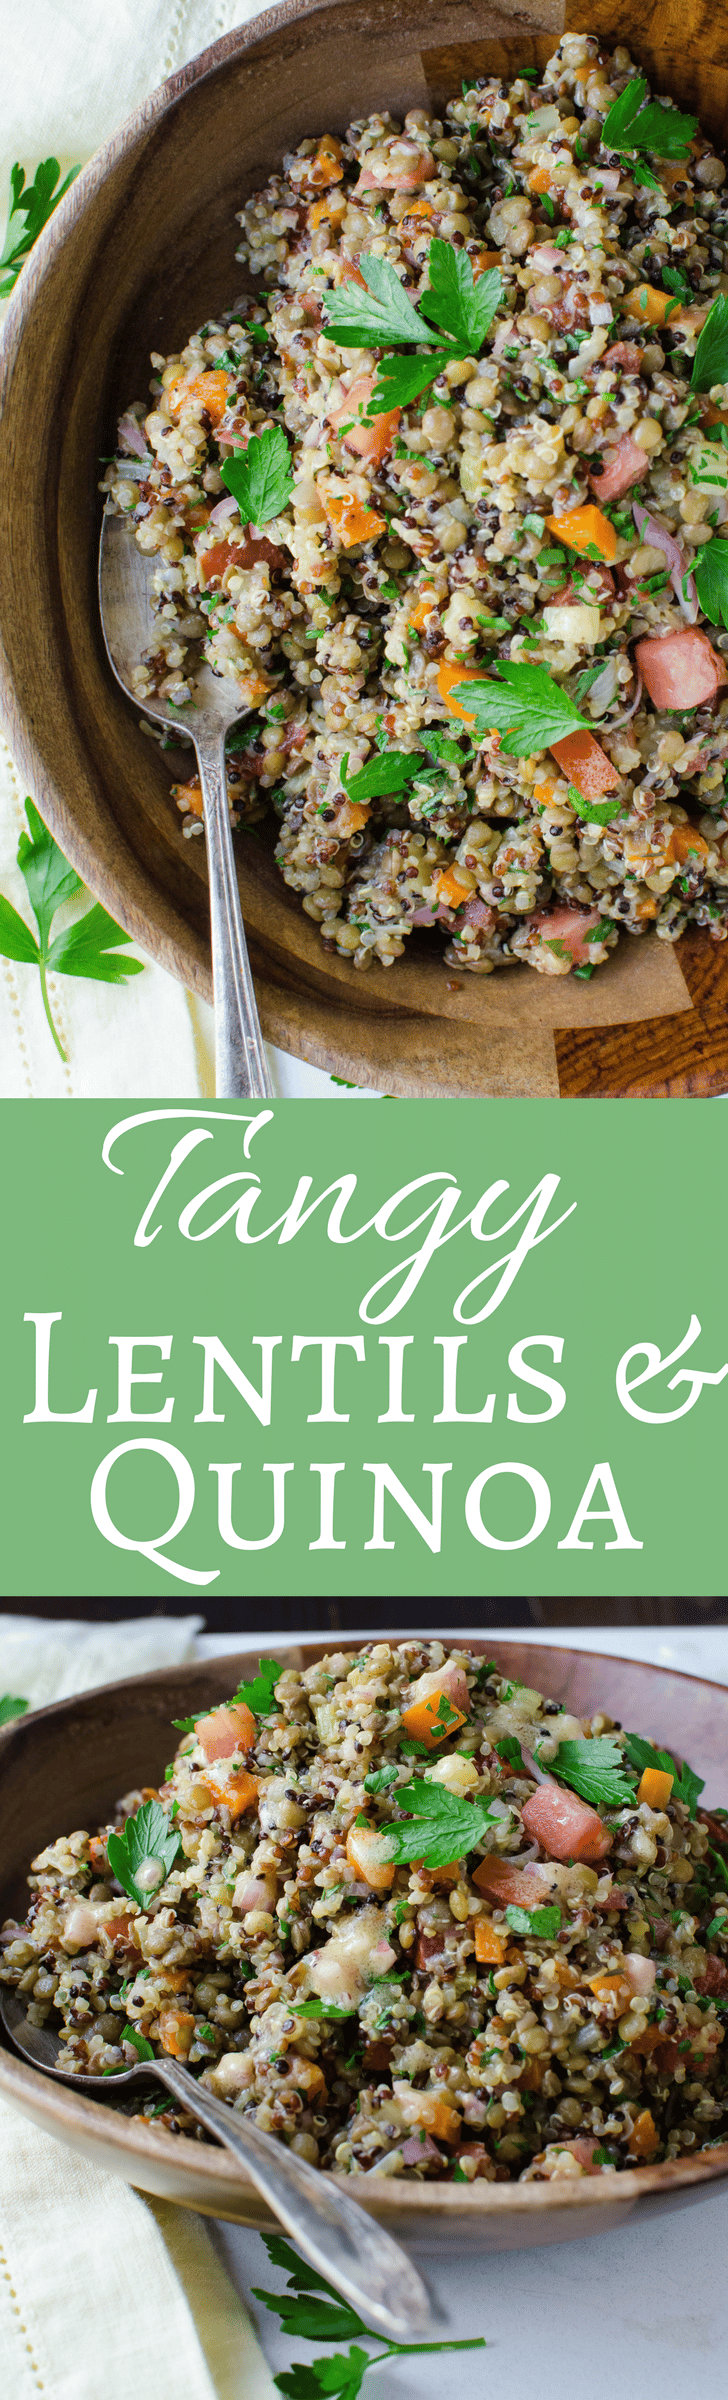  For healthy comfort food try this easy recipe - Tangy Lentils & Quinoa w/shallot-dijon dressing! Great next to grilled chicken or steak!